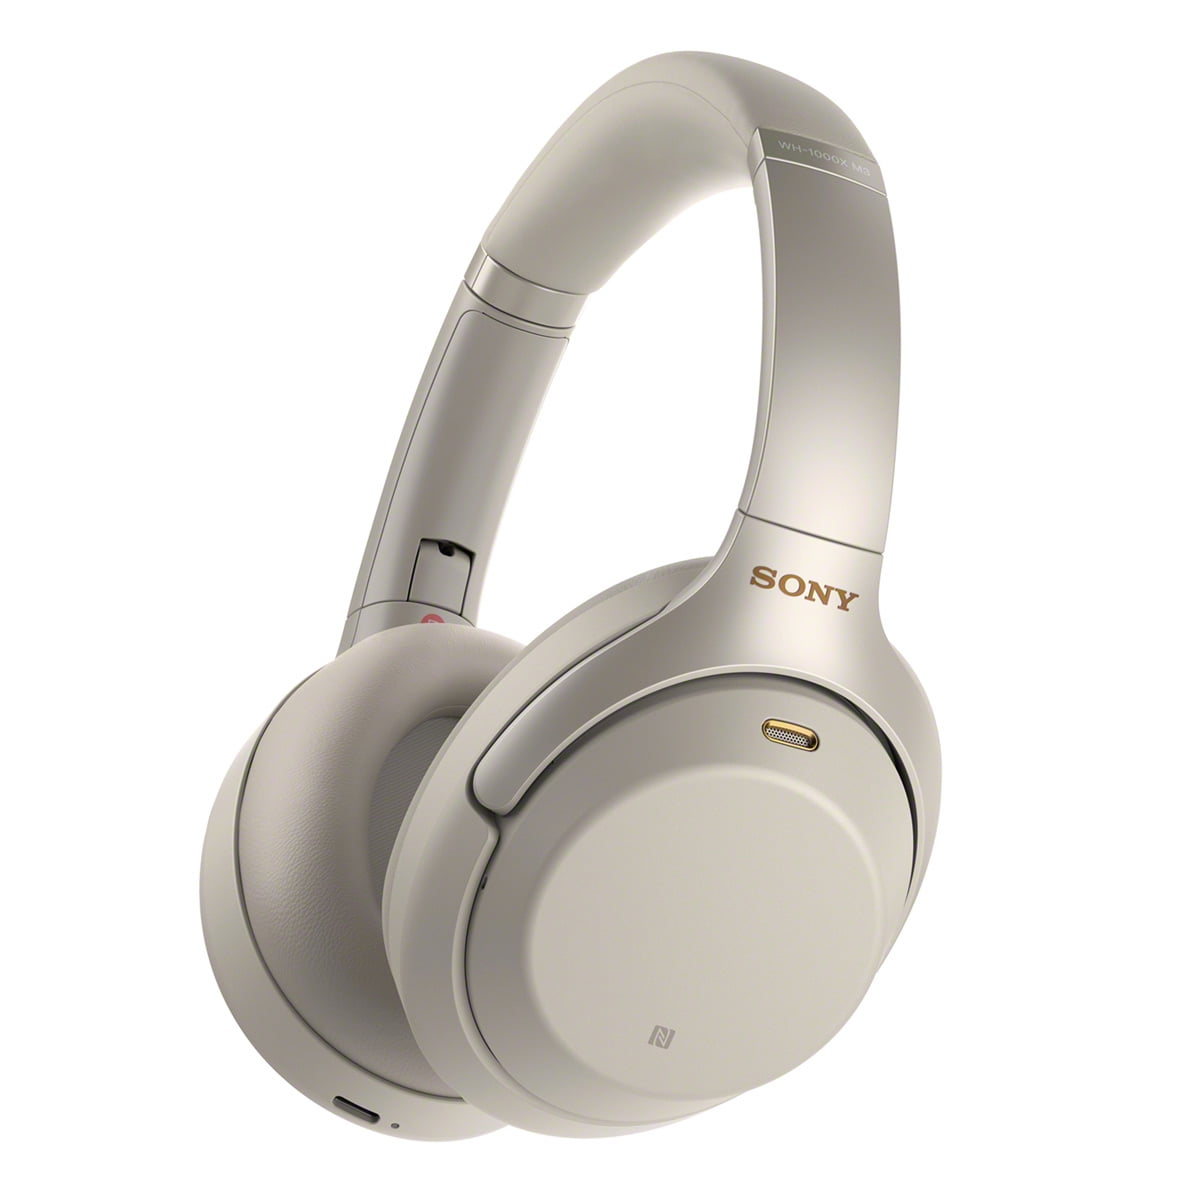 Sony WH1000XM3 Wireless Noise Canceling Over-the-Ear Headphones with Google Assistant